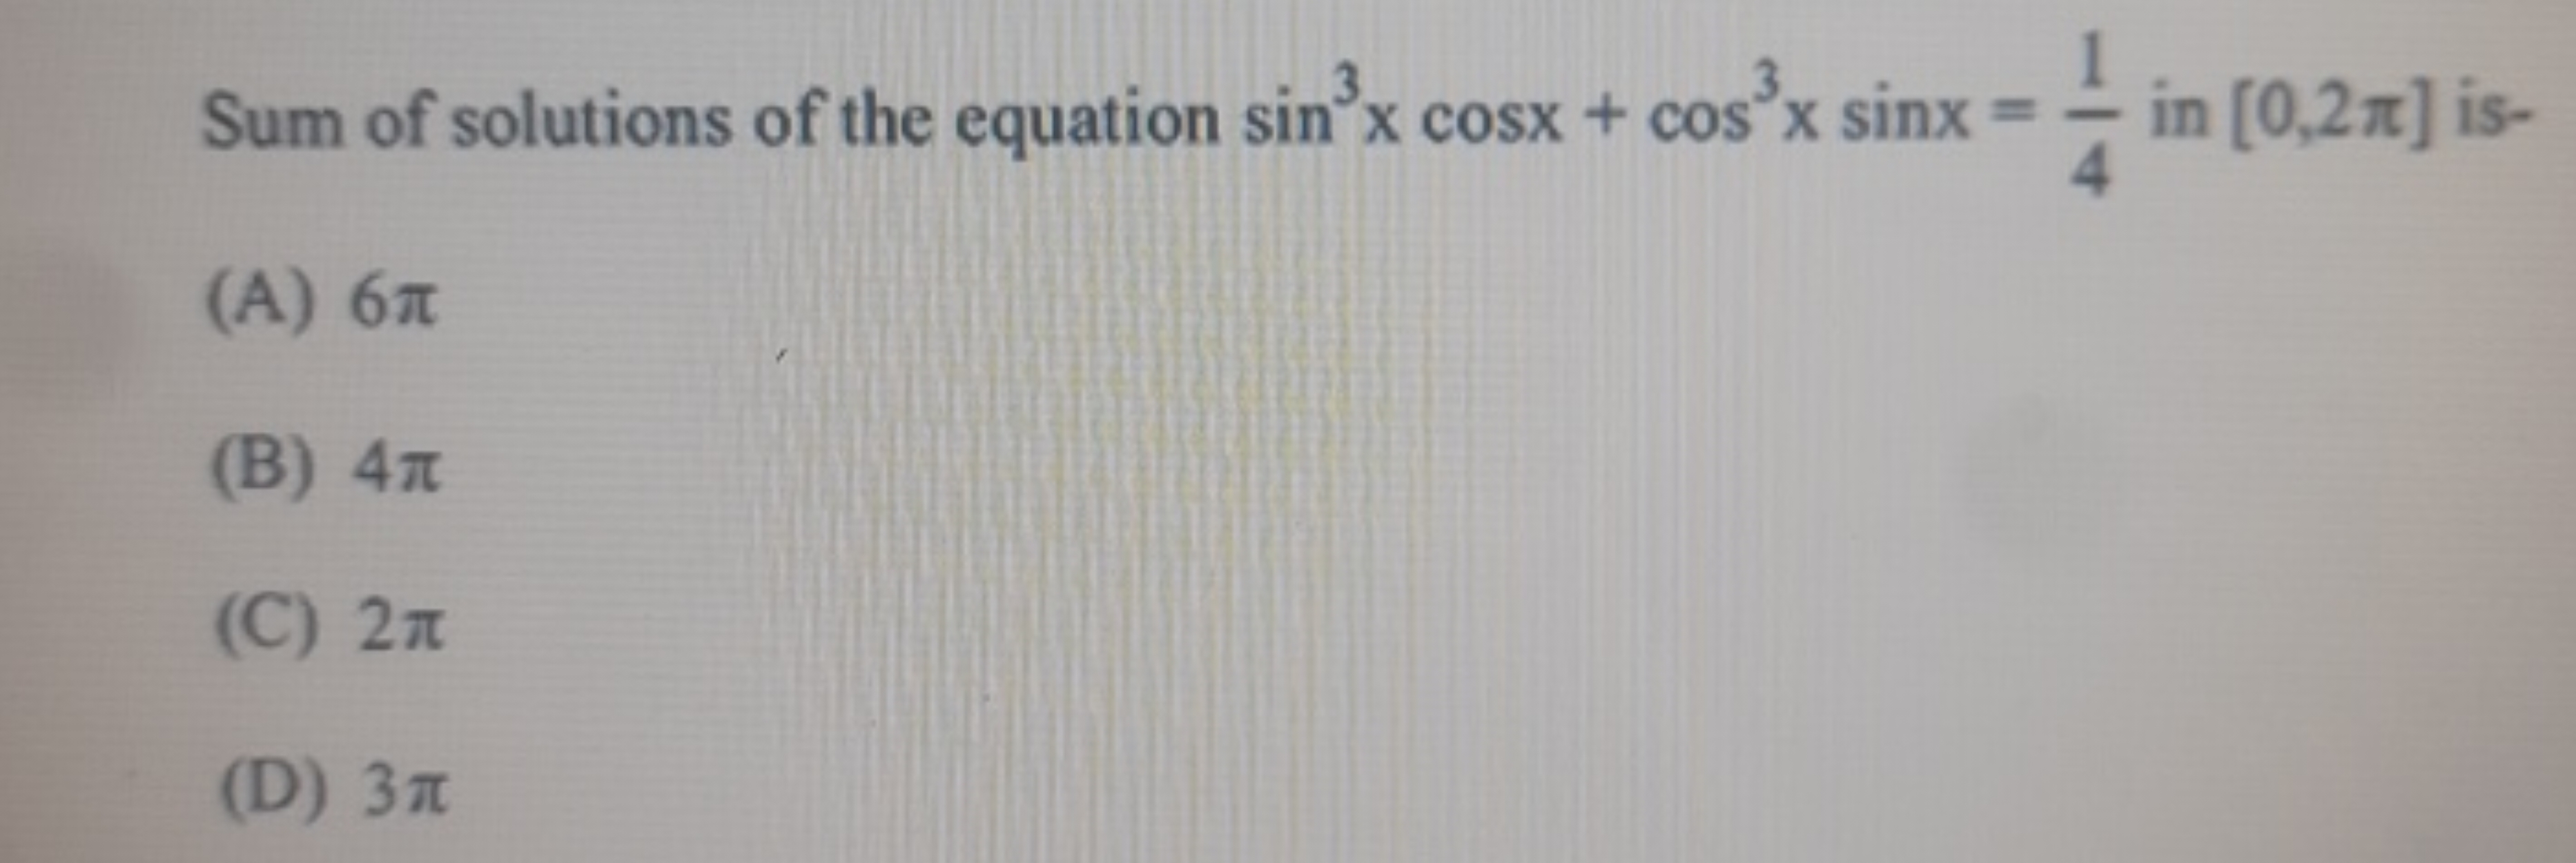 Sum of solutions of the equation sin3xcosx+cos3xsinx=41​ in [0,2π] is-